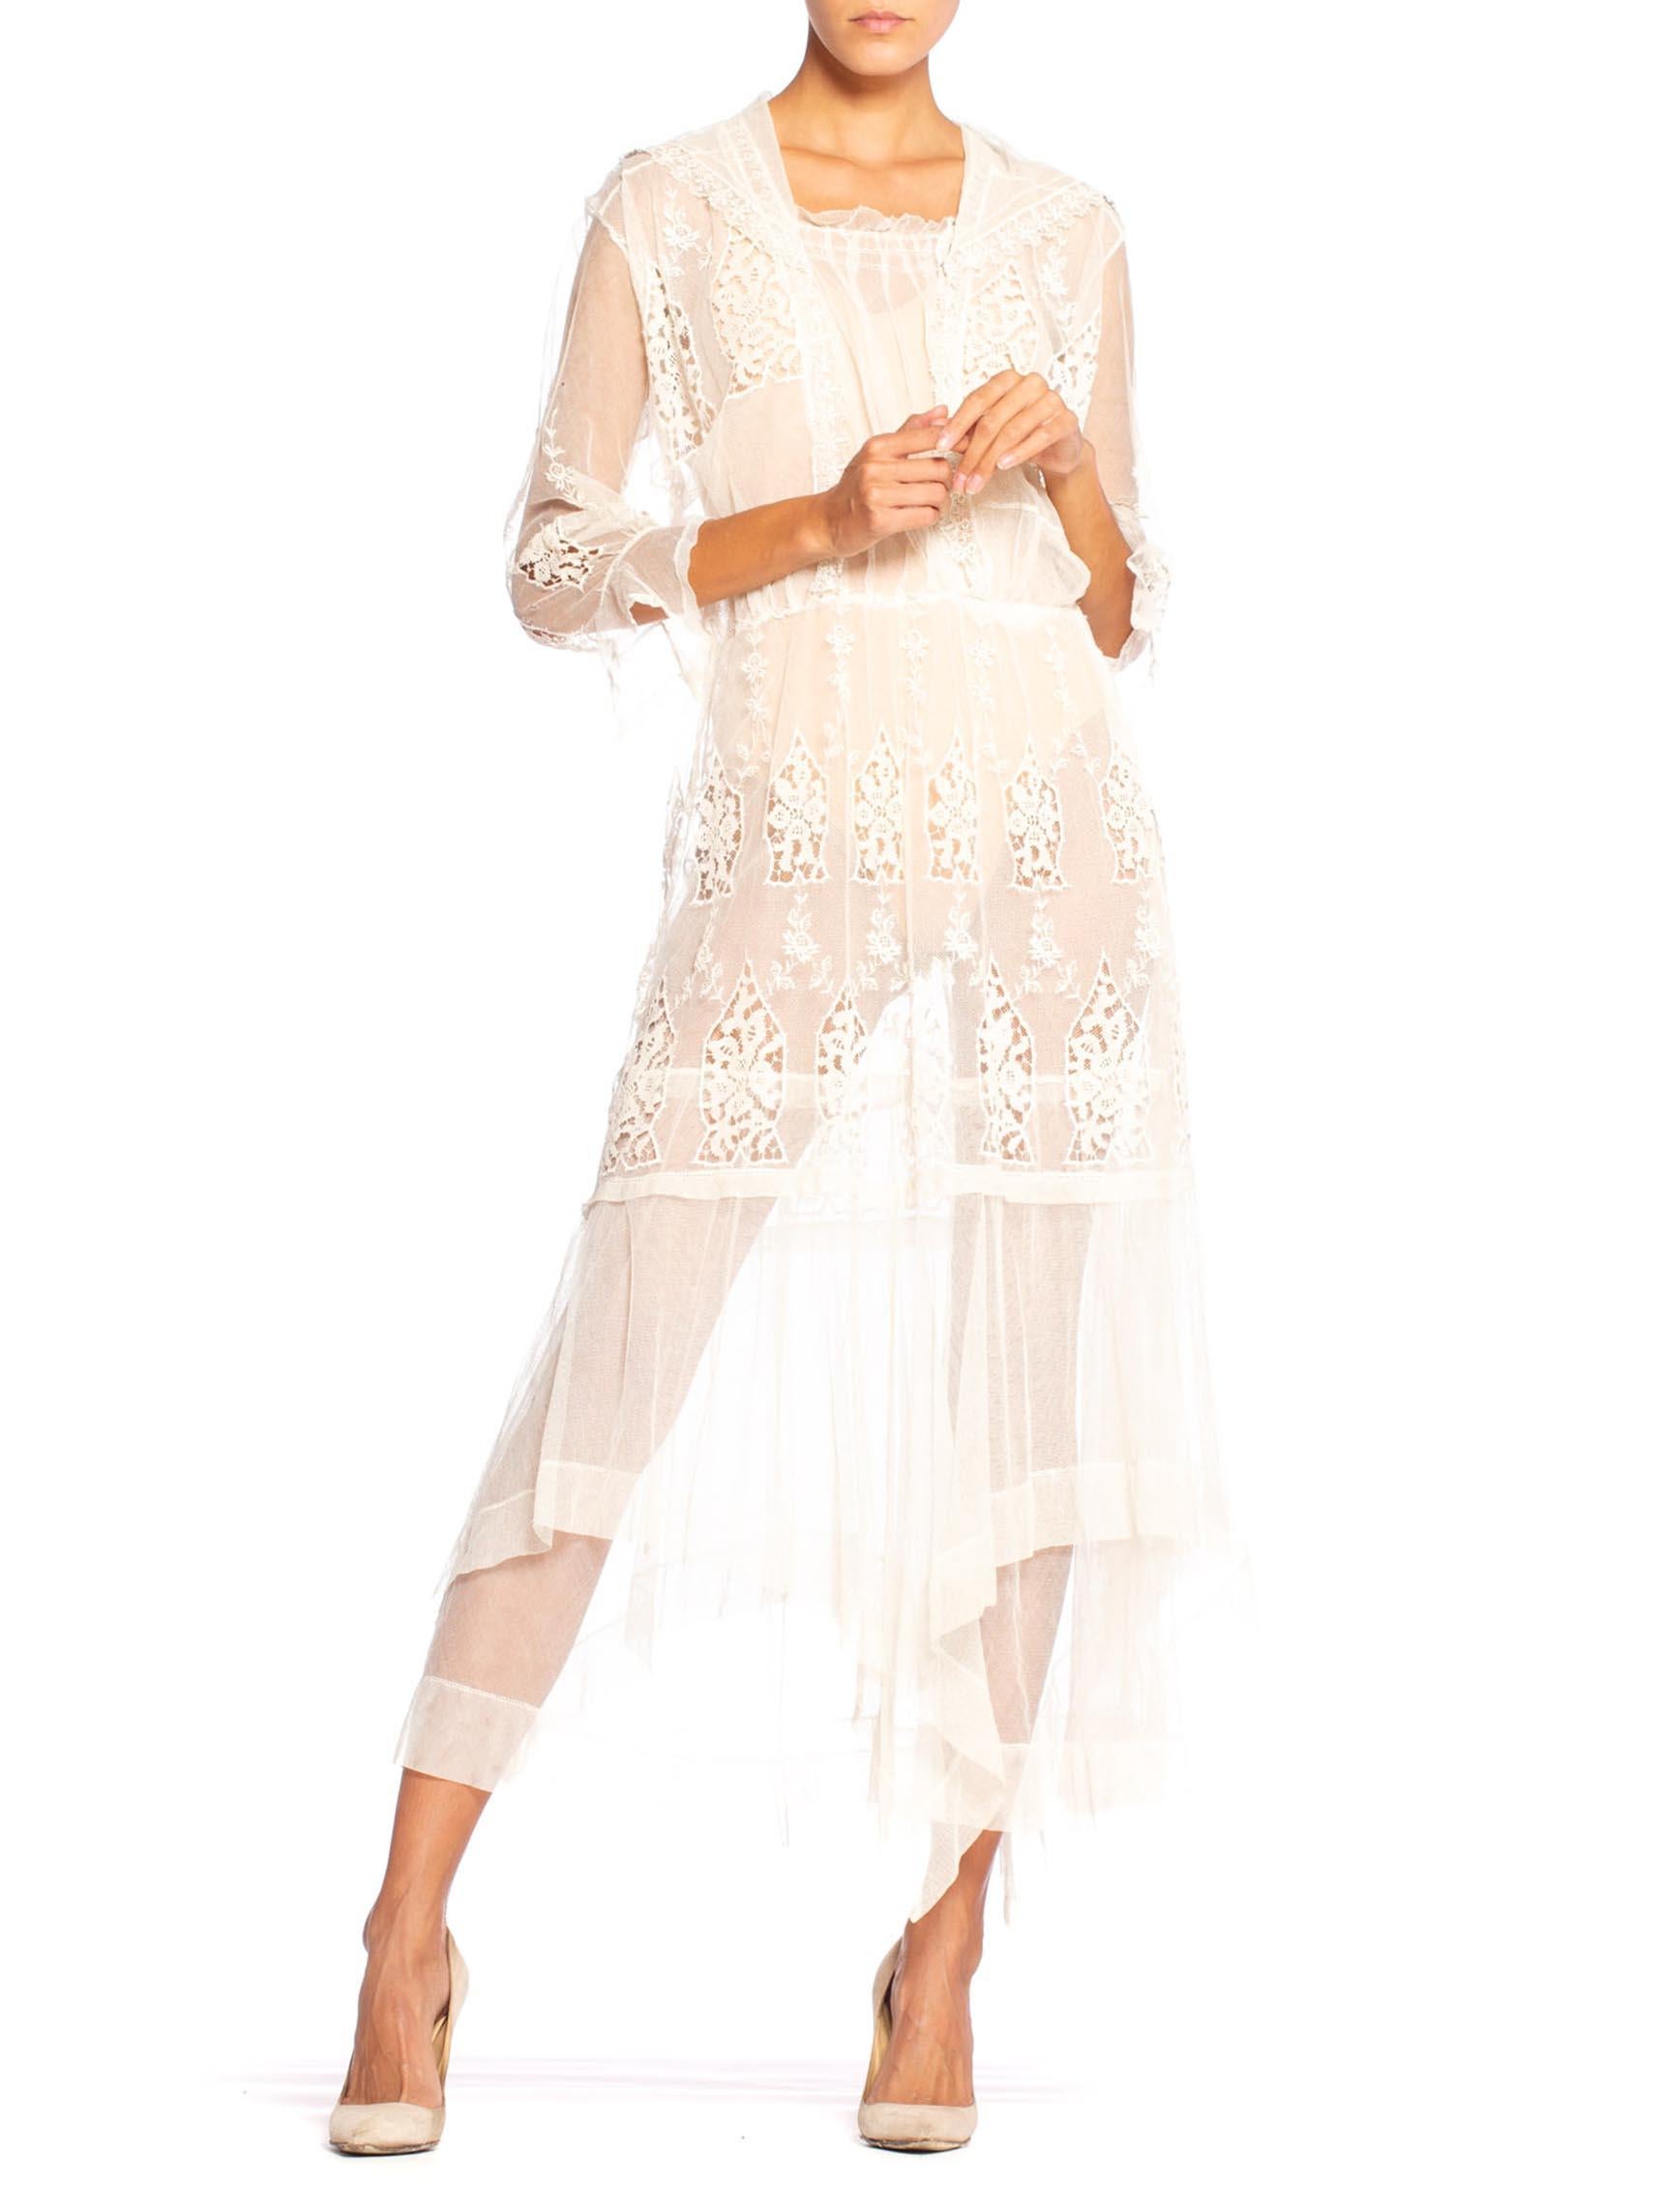 Edwardian Cream Organic Cotton Embroidered Tulle & Lace Dress With Sheer Sleeves 2